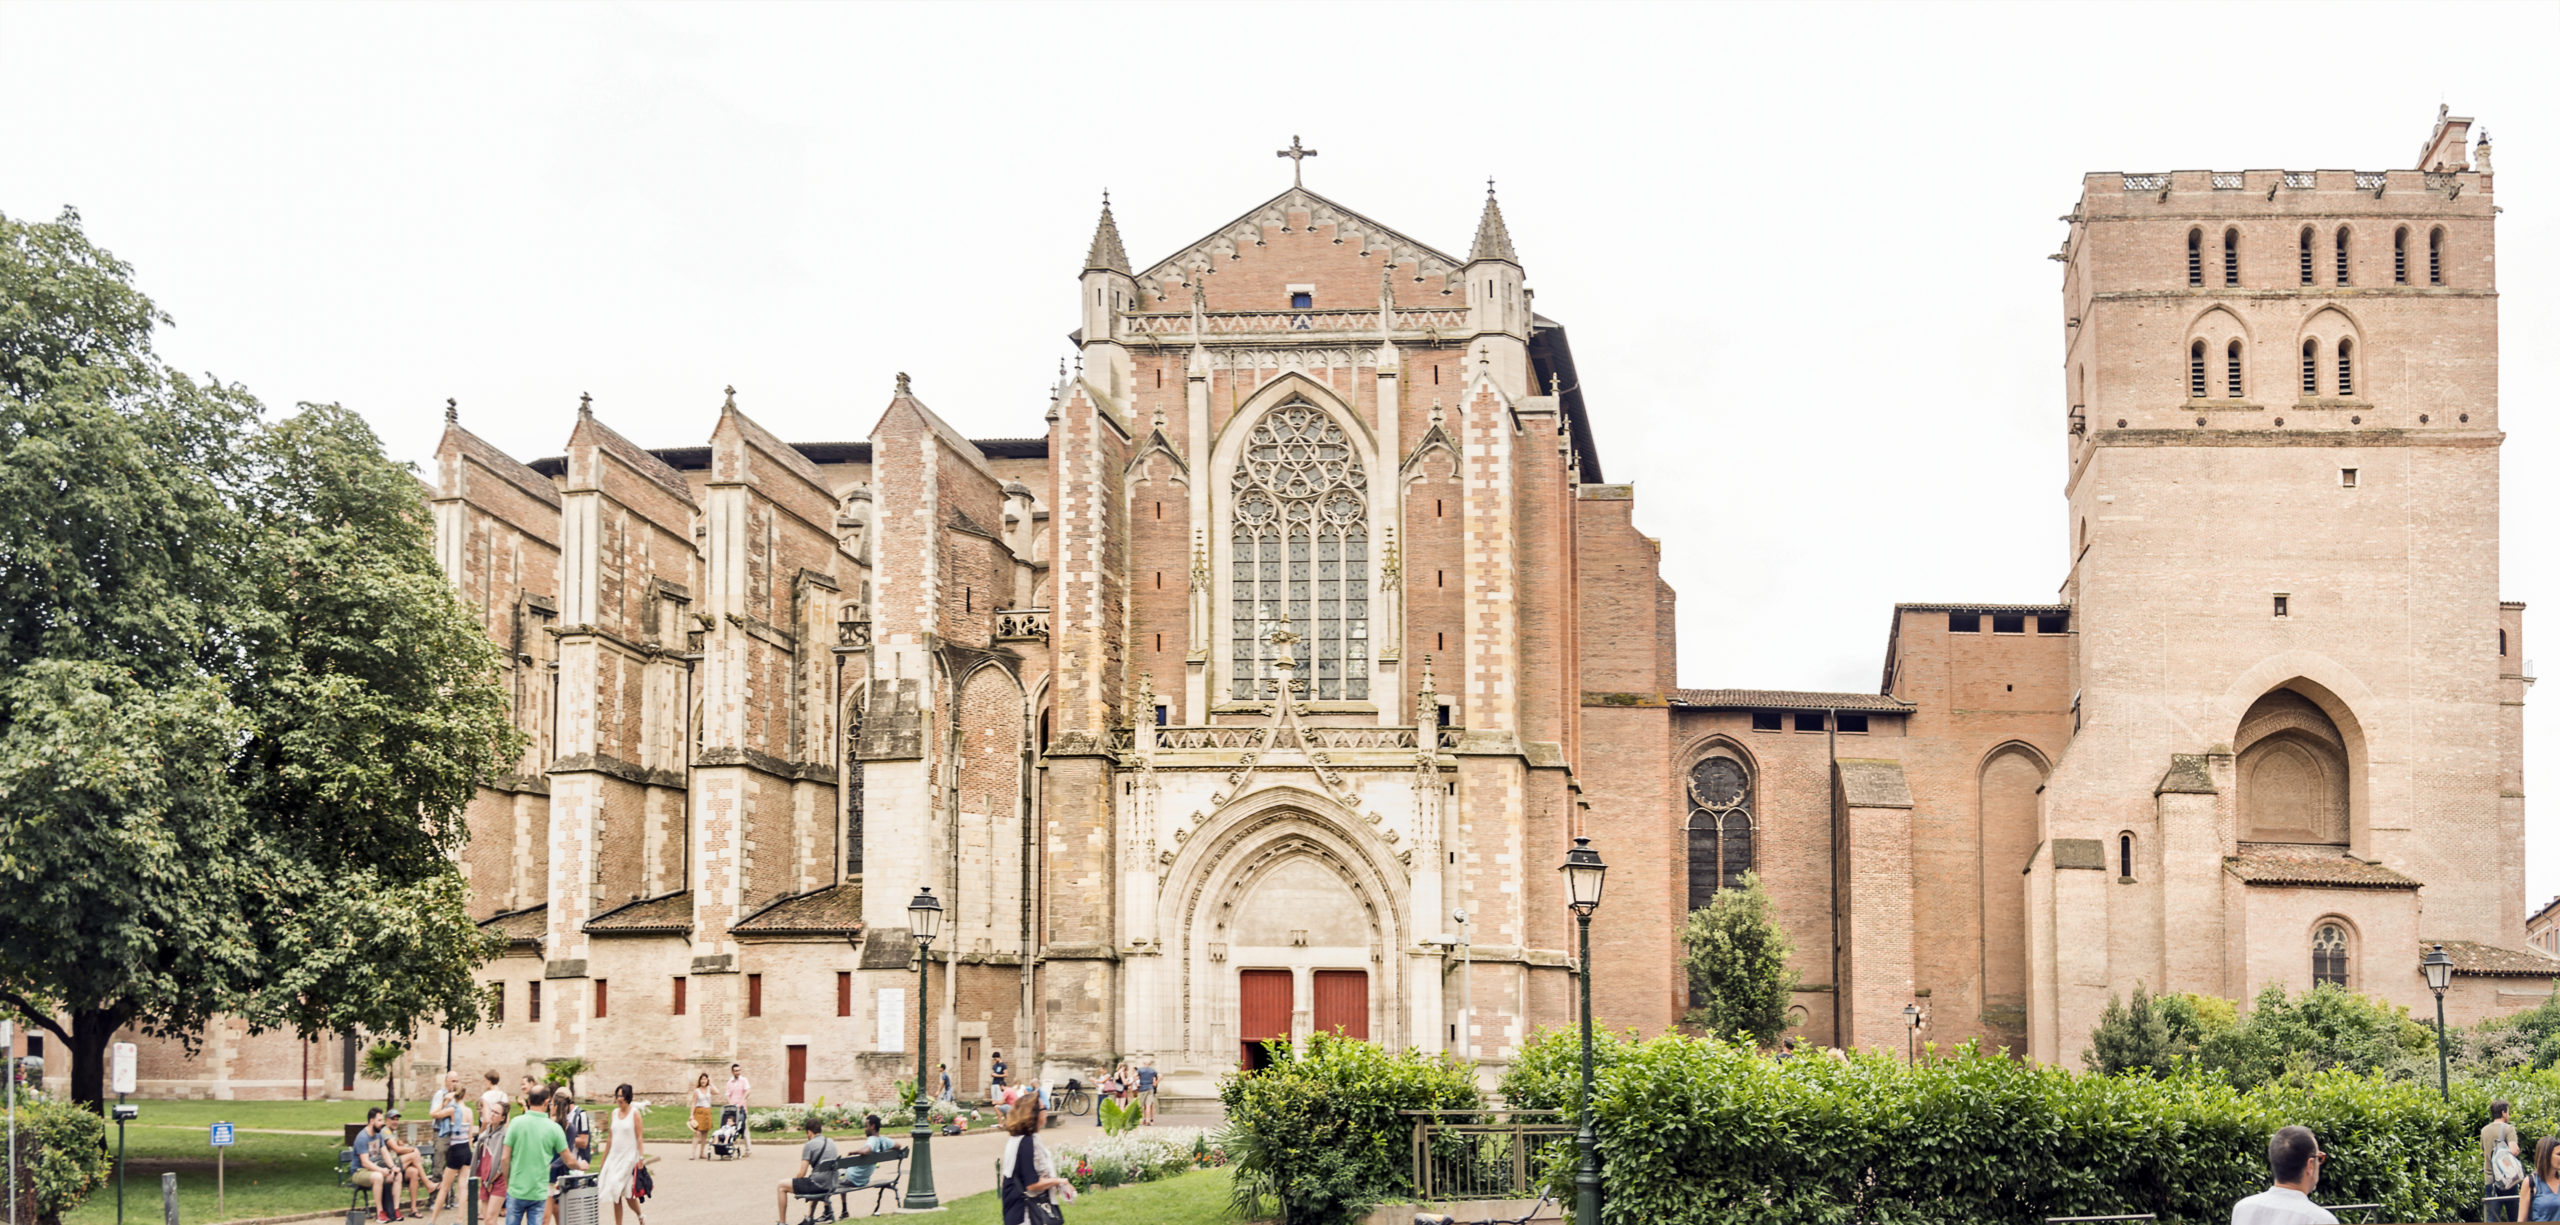 North façade of the Cathedral of Saint Stephen, Toulouse